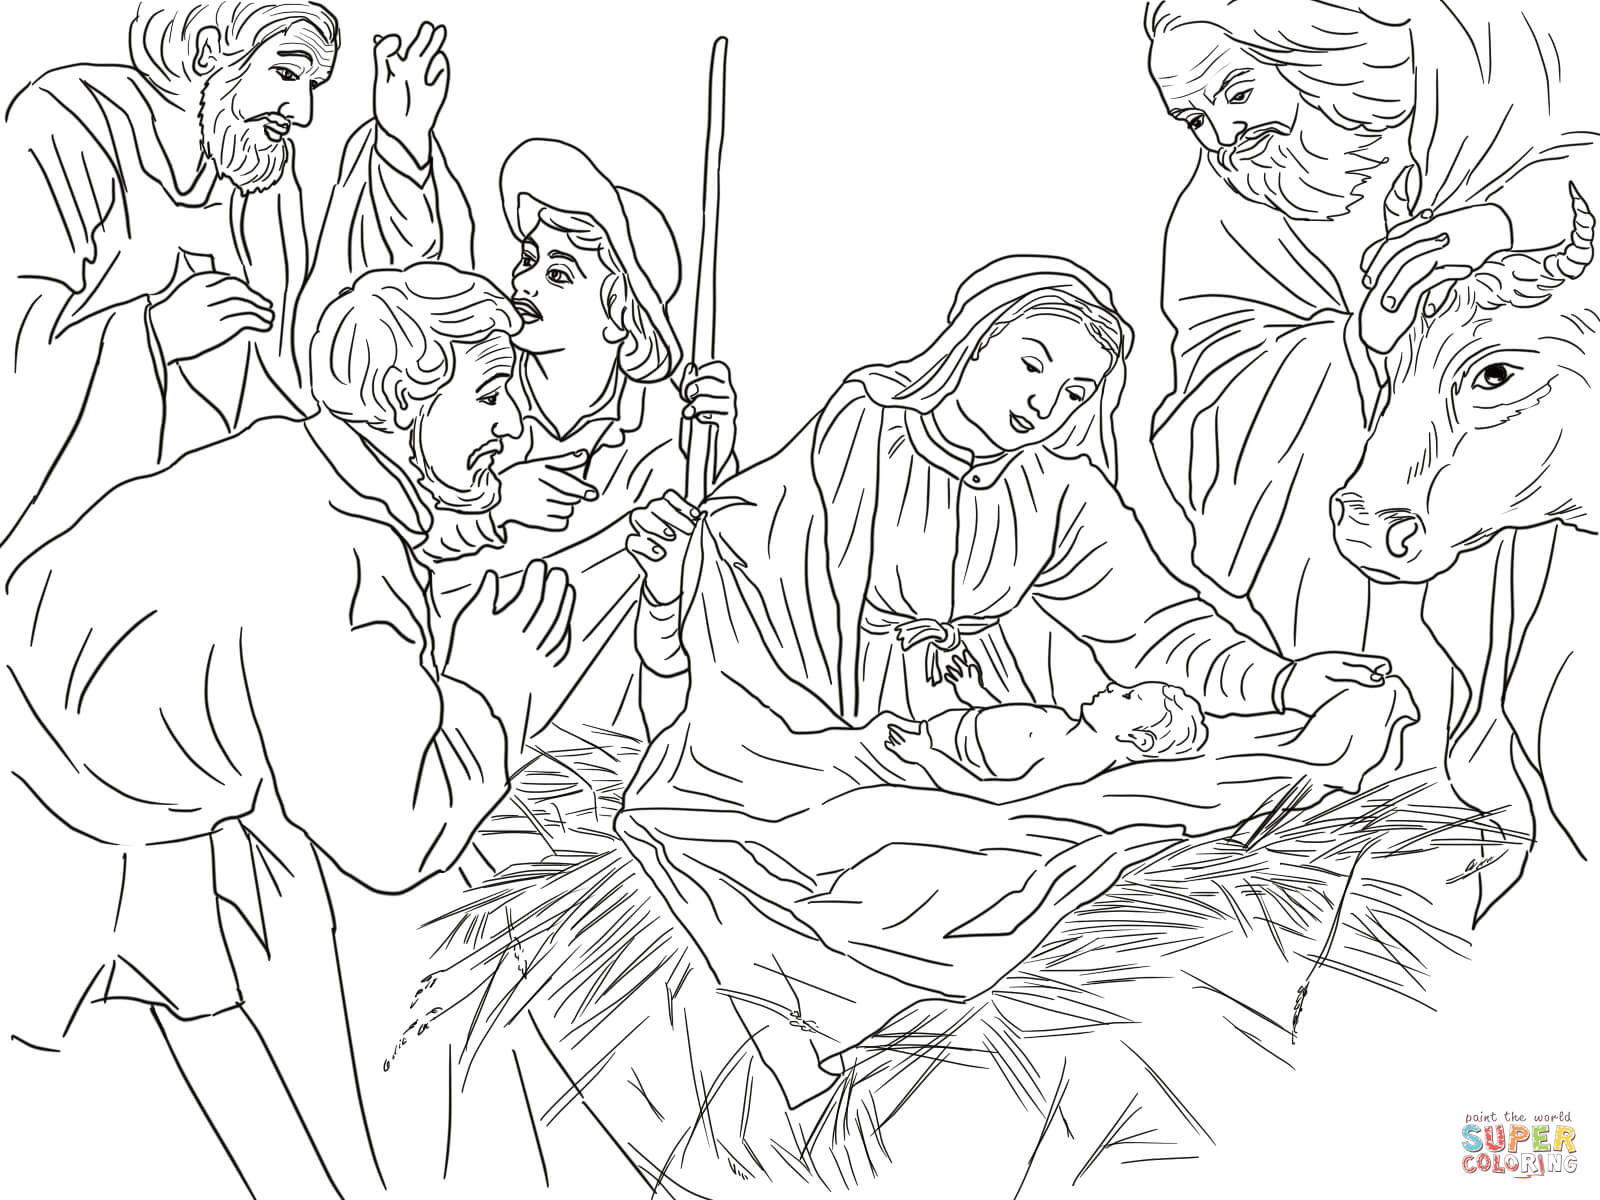 Jesus Nativity coloring pages | Free Coloring Pages